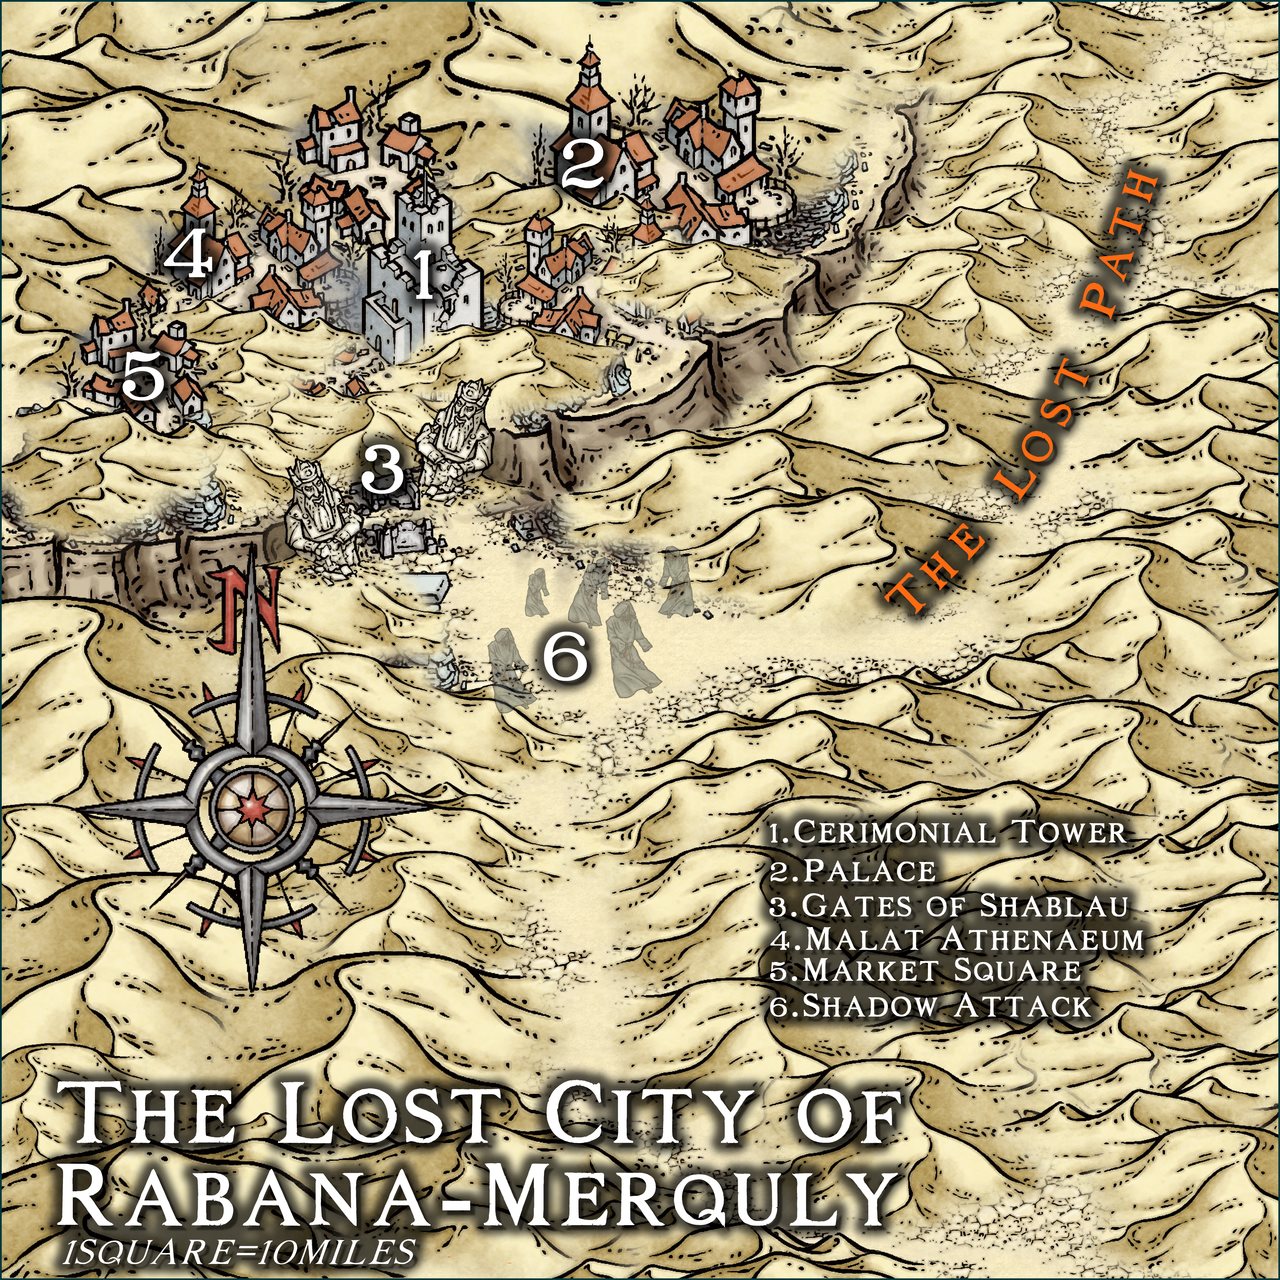 Nibirum Map: lost city of rabana-merquly by Ricko Hasche